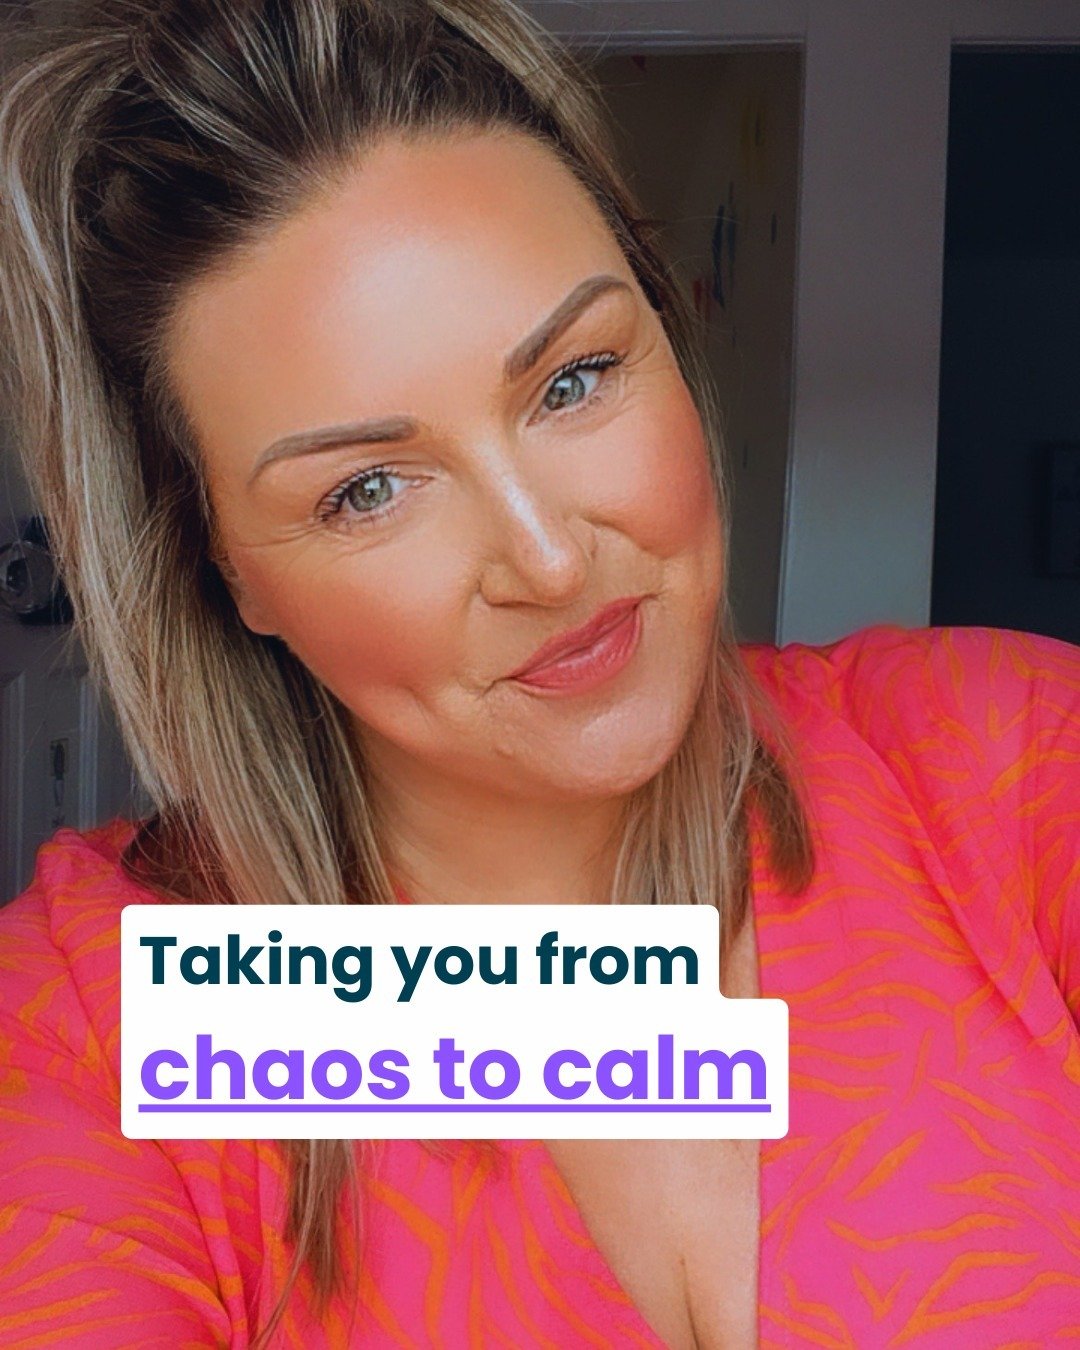 I'm here to take you from chaos to calm 😌

It's so common for people in recovery to be used to being in the throes of chaos and to rely heavily on adrenaline. 

But imagine what it would feel like to remove yourself from that constant whirlwind and 